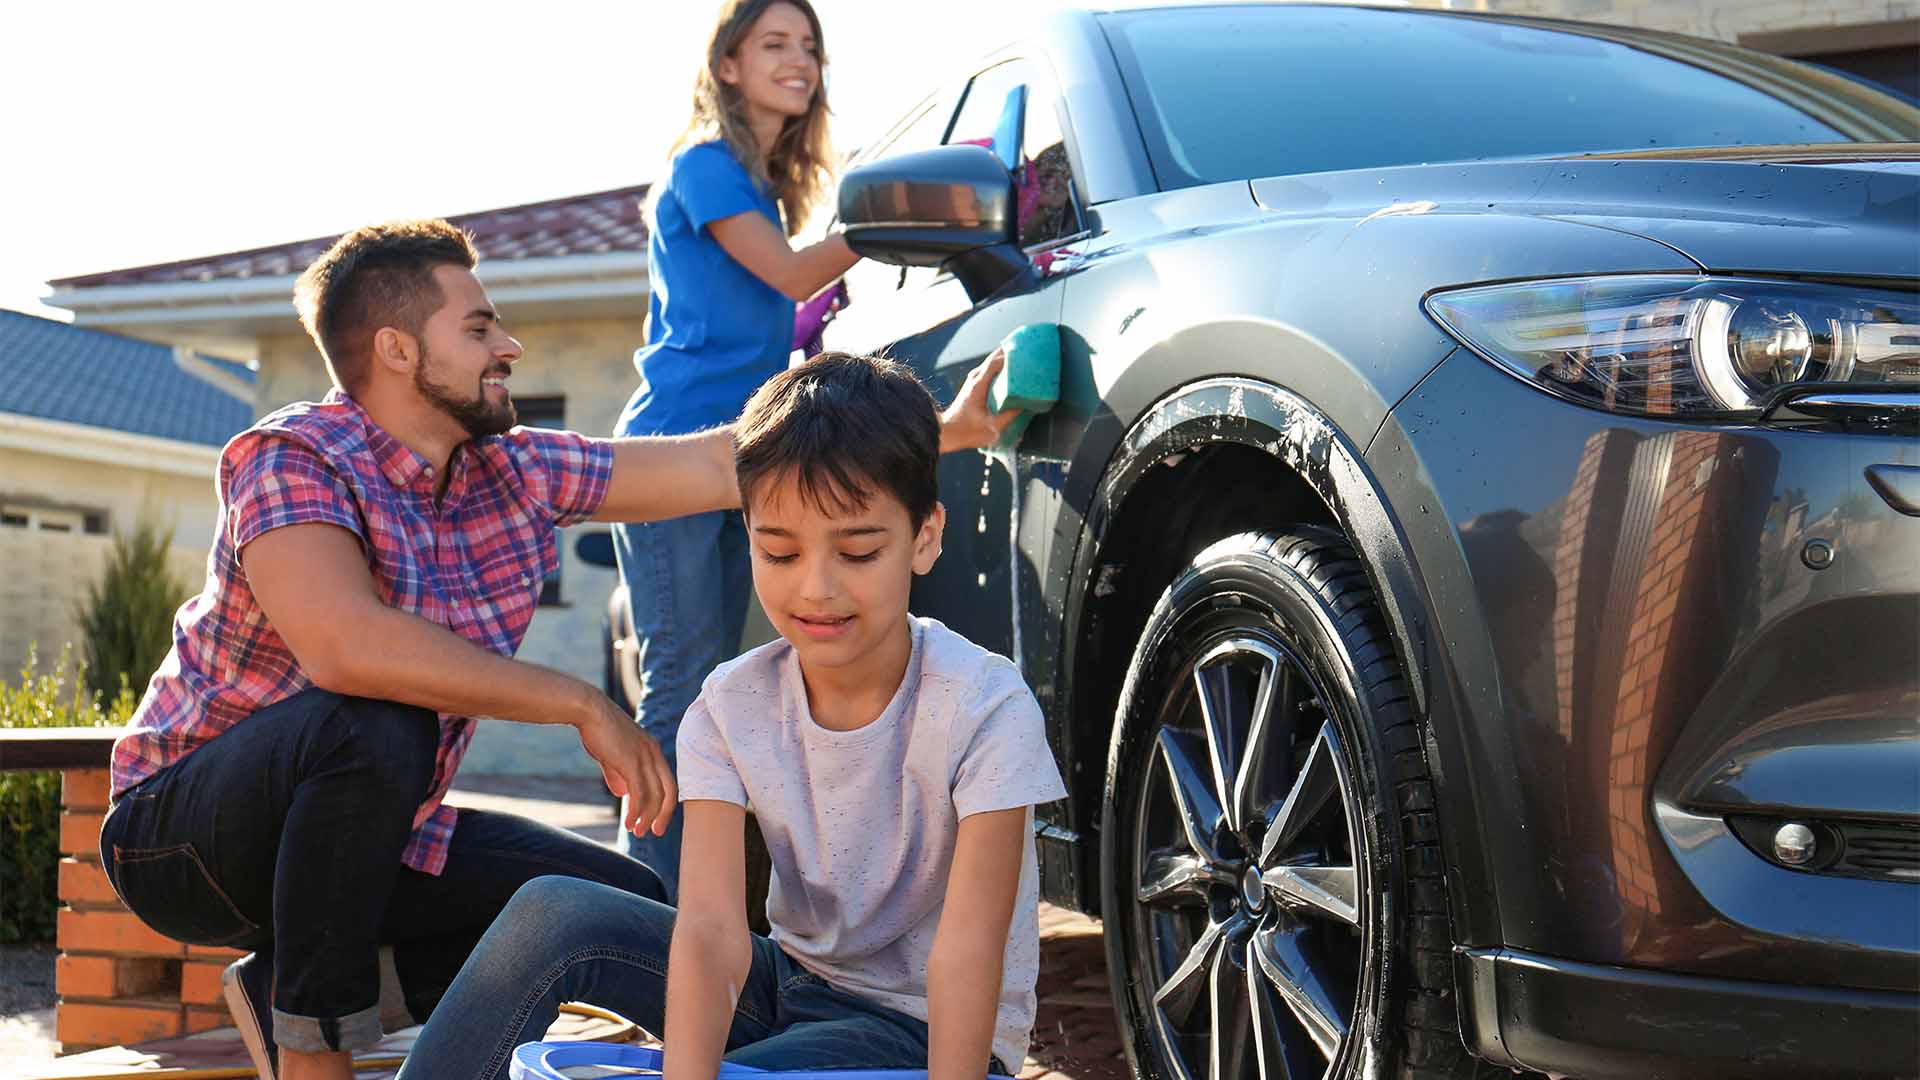 Family washing car together in driveway